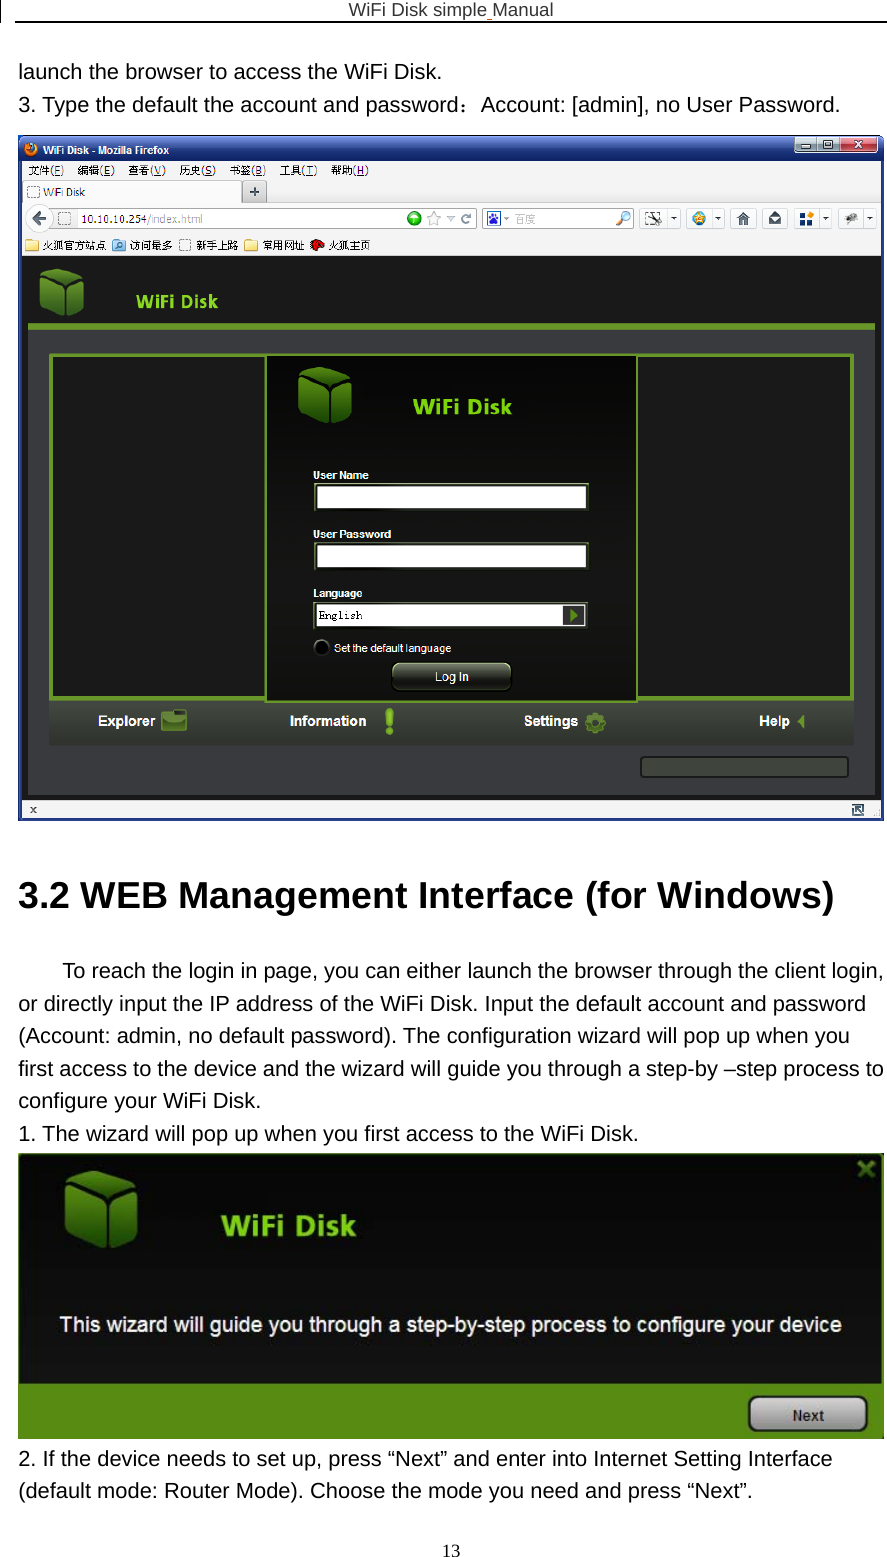 WiFi Disk simple Manual  13launch the browser to access the WiFi Disk. 3. Type the default the account and password：Account: [admin], no User Password.  3.2 WEB Management Interface (for Windows) To reach the login in page, you can either launch the browser through the client login, or directly input the IP address of the WiFi Disk. Input the default account and password (Account: admin, no default password). The configuration wizard will pop up when you first access to the device and the wizard will guide you through a step-by –step process to configure your WiFi Disk. 1. The wizard will pop up when you first access to the WiFi Disk.  2. If the device needs to set up, press “Next” and enter into Internet Setting Interface (default mode: Router Mode). Choose the mode you need and press “Next”. 